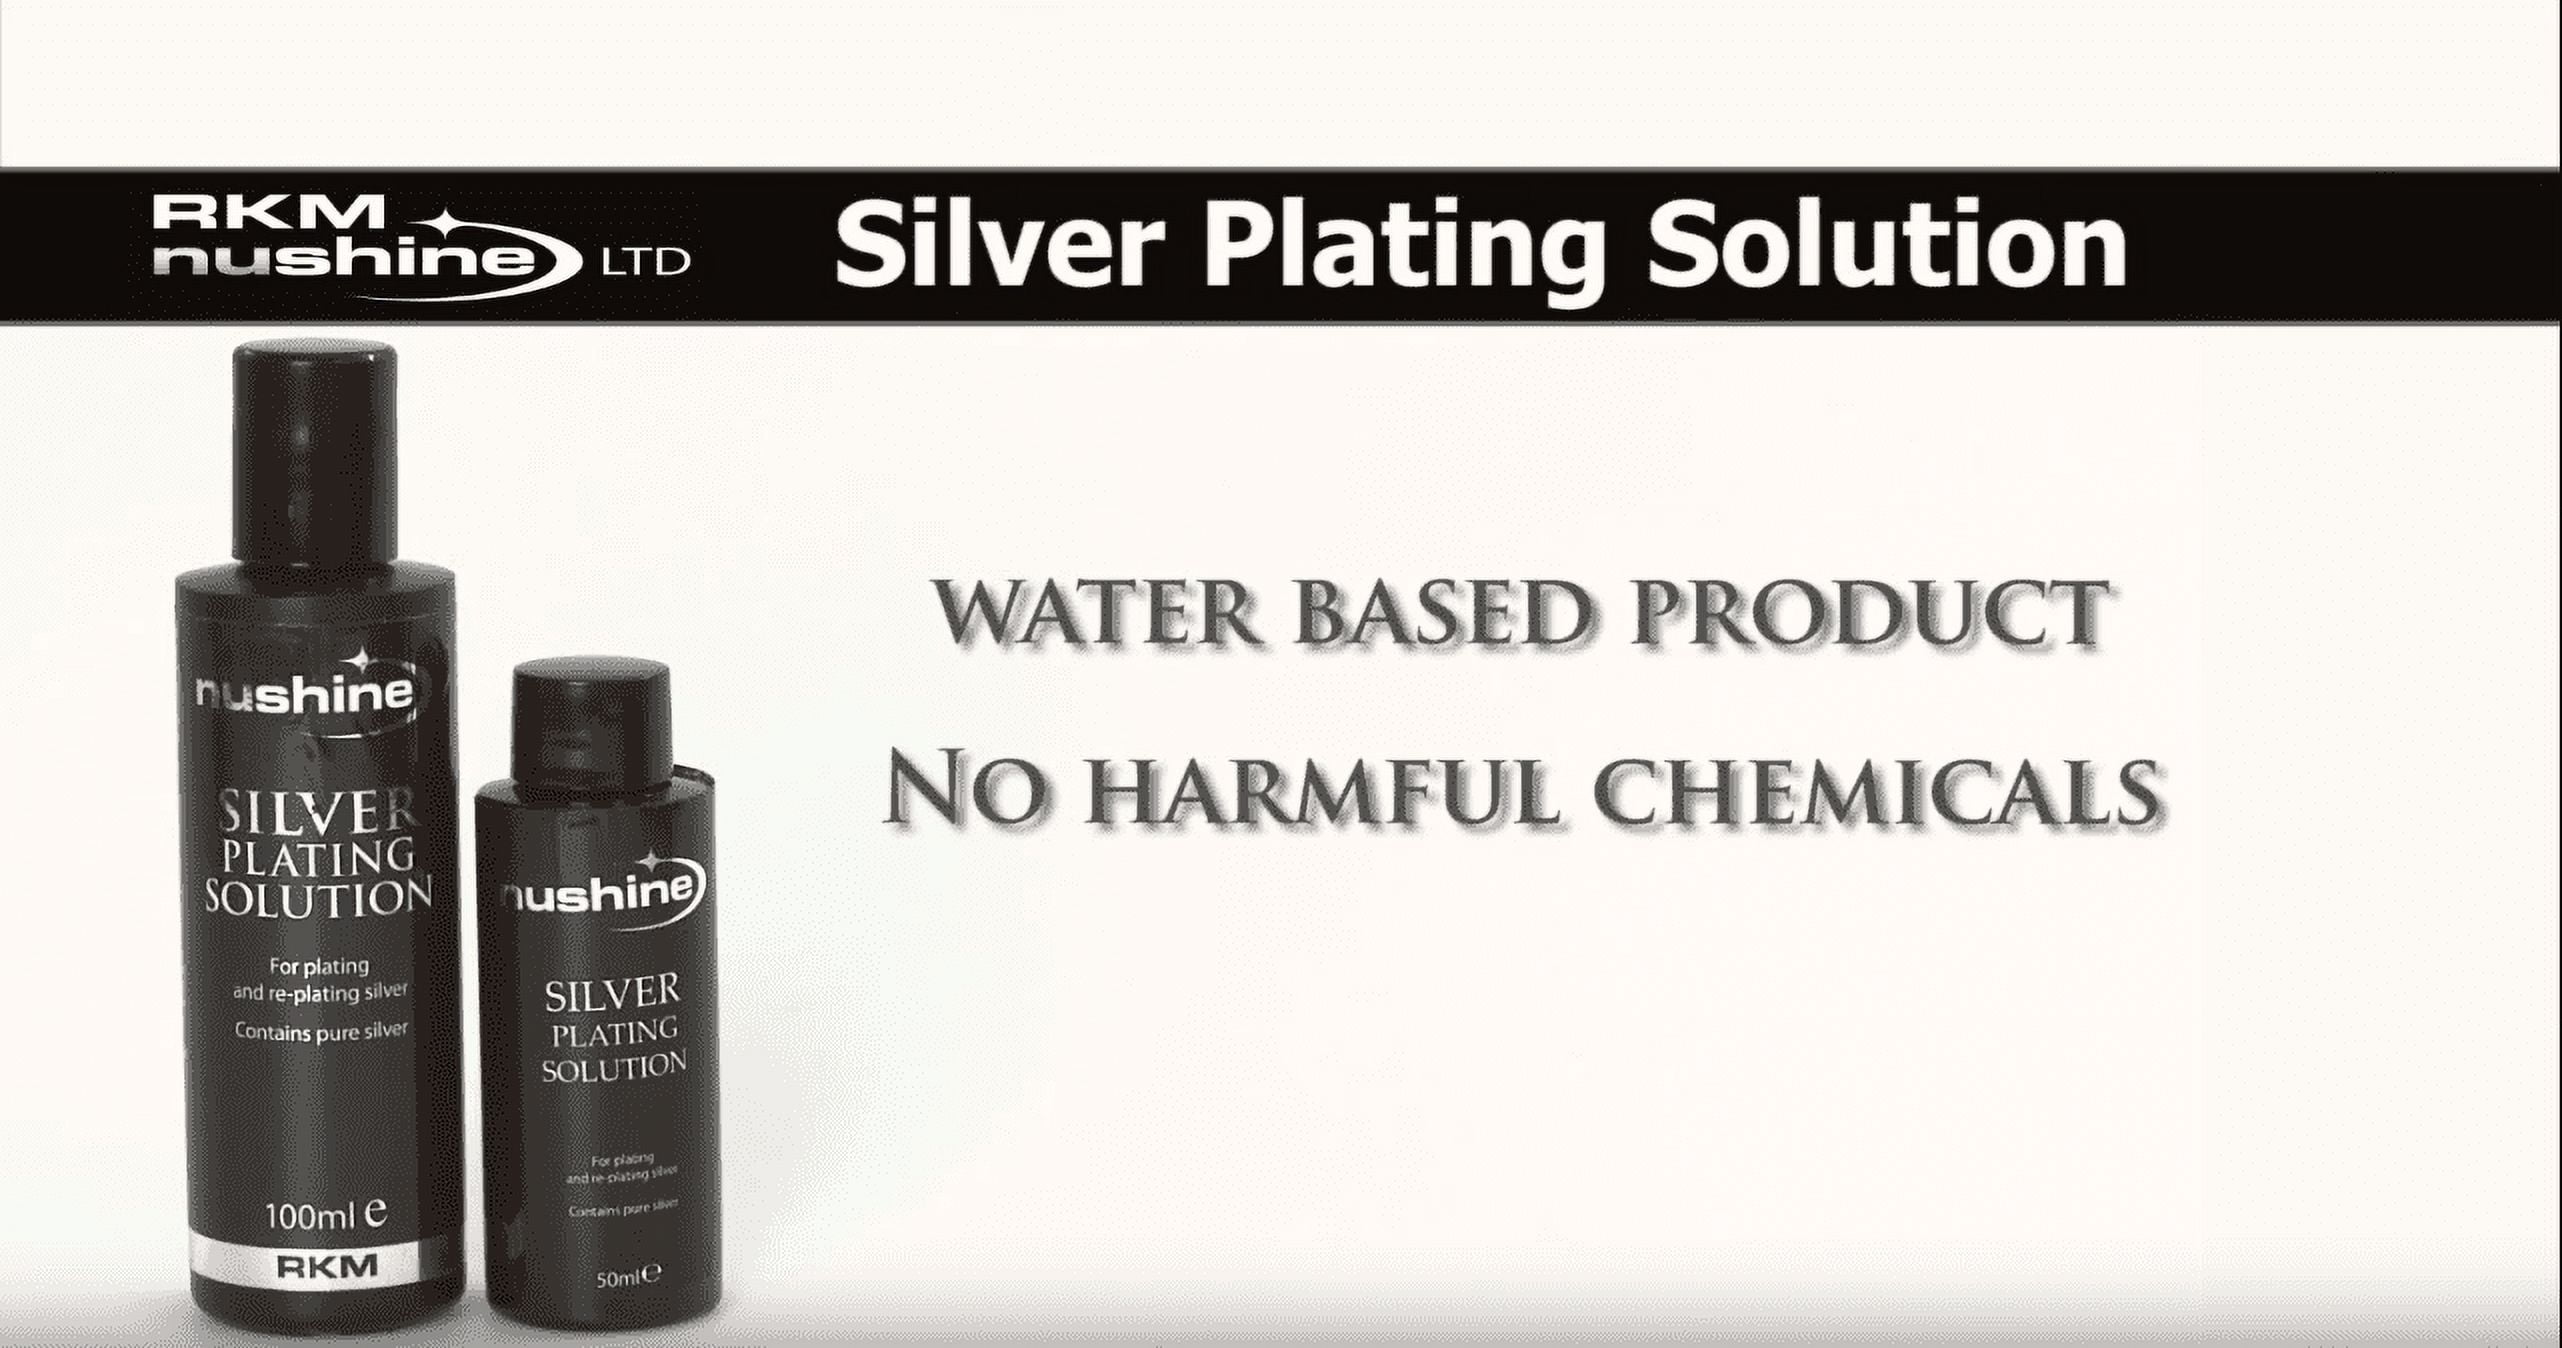 Nushine Silver Plating Solution 1.7 Oz - Permanently Plate Pure